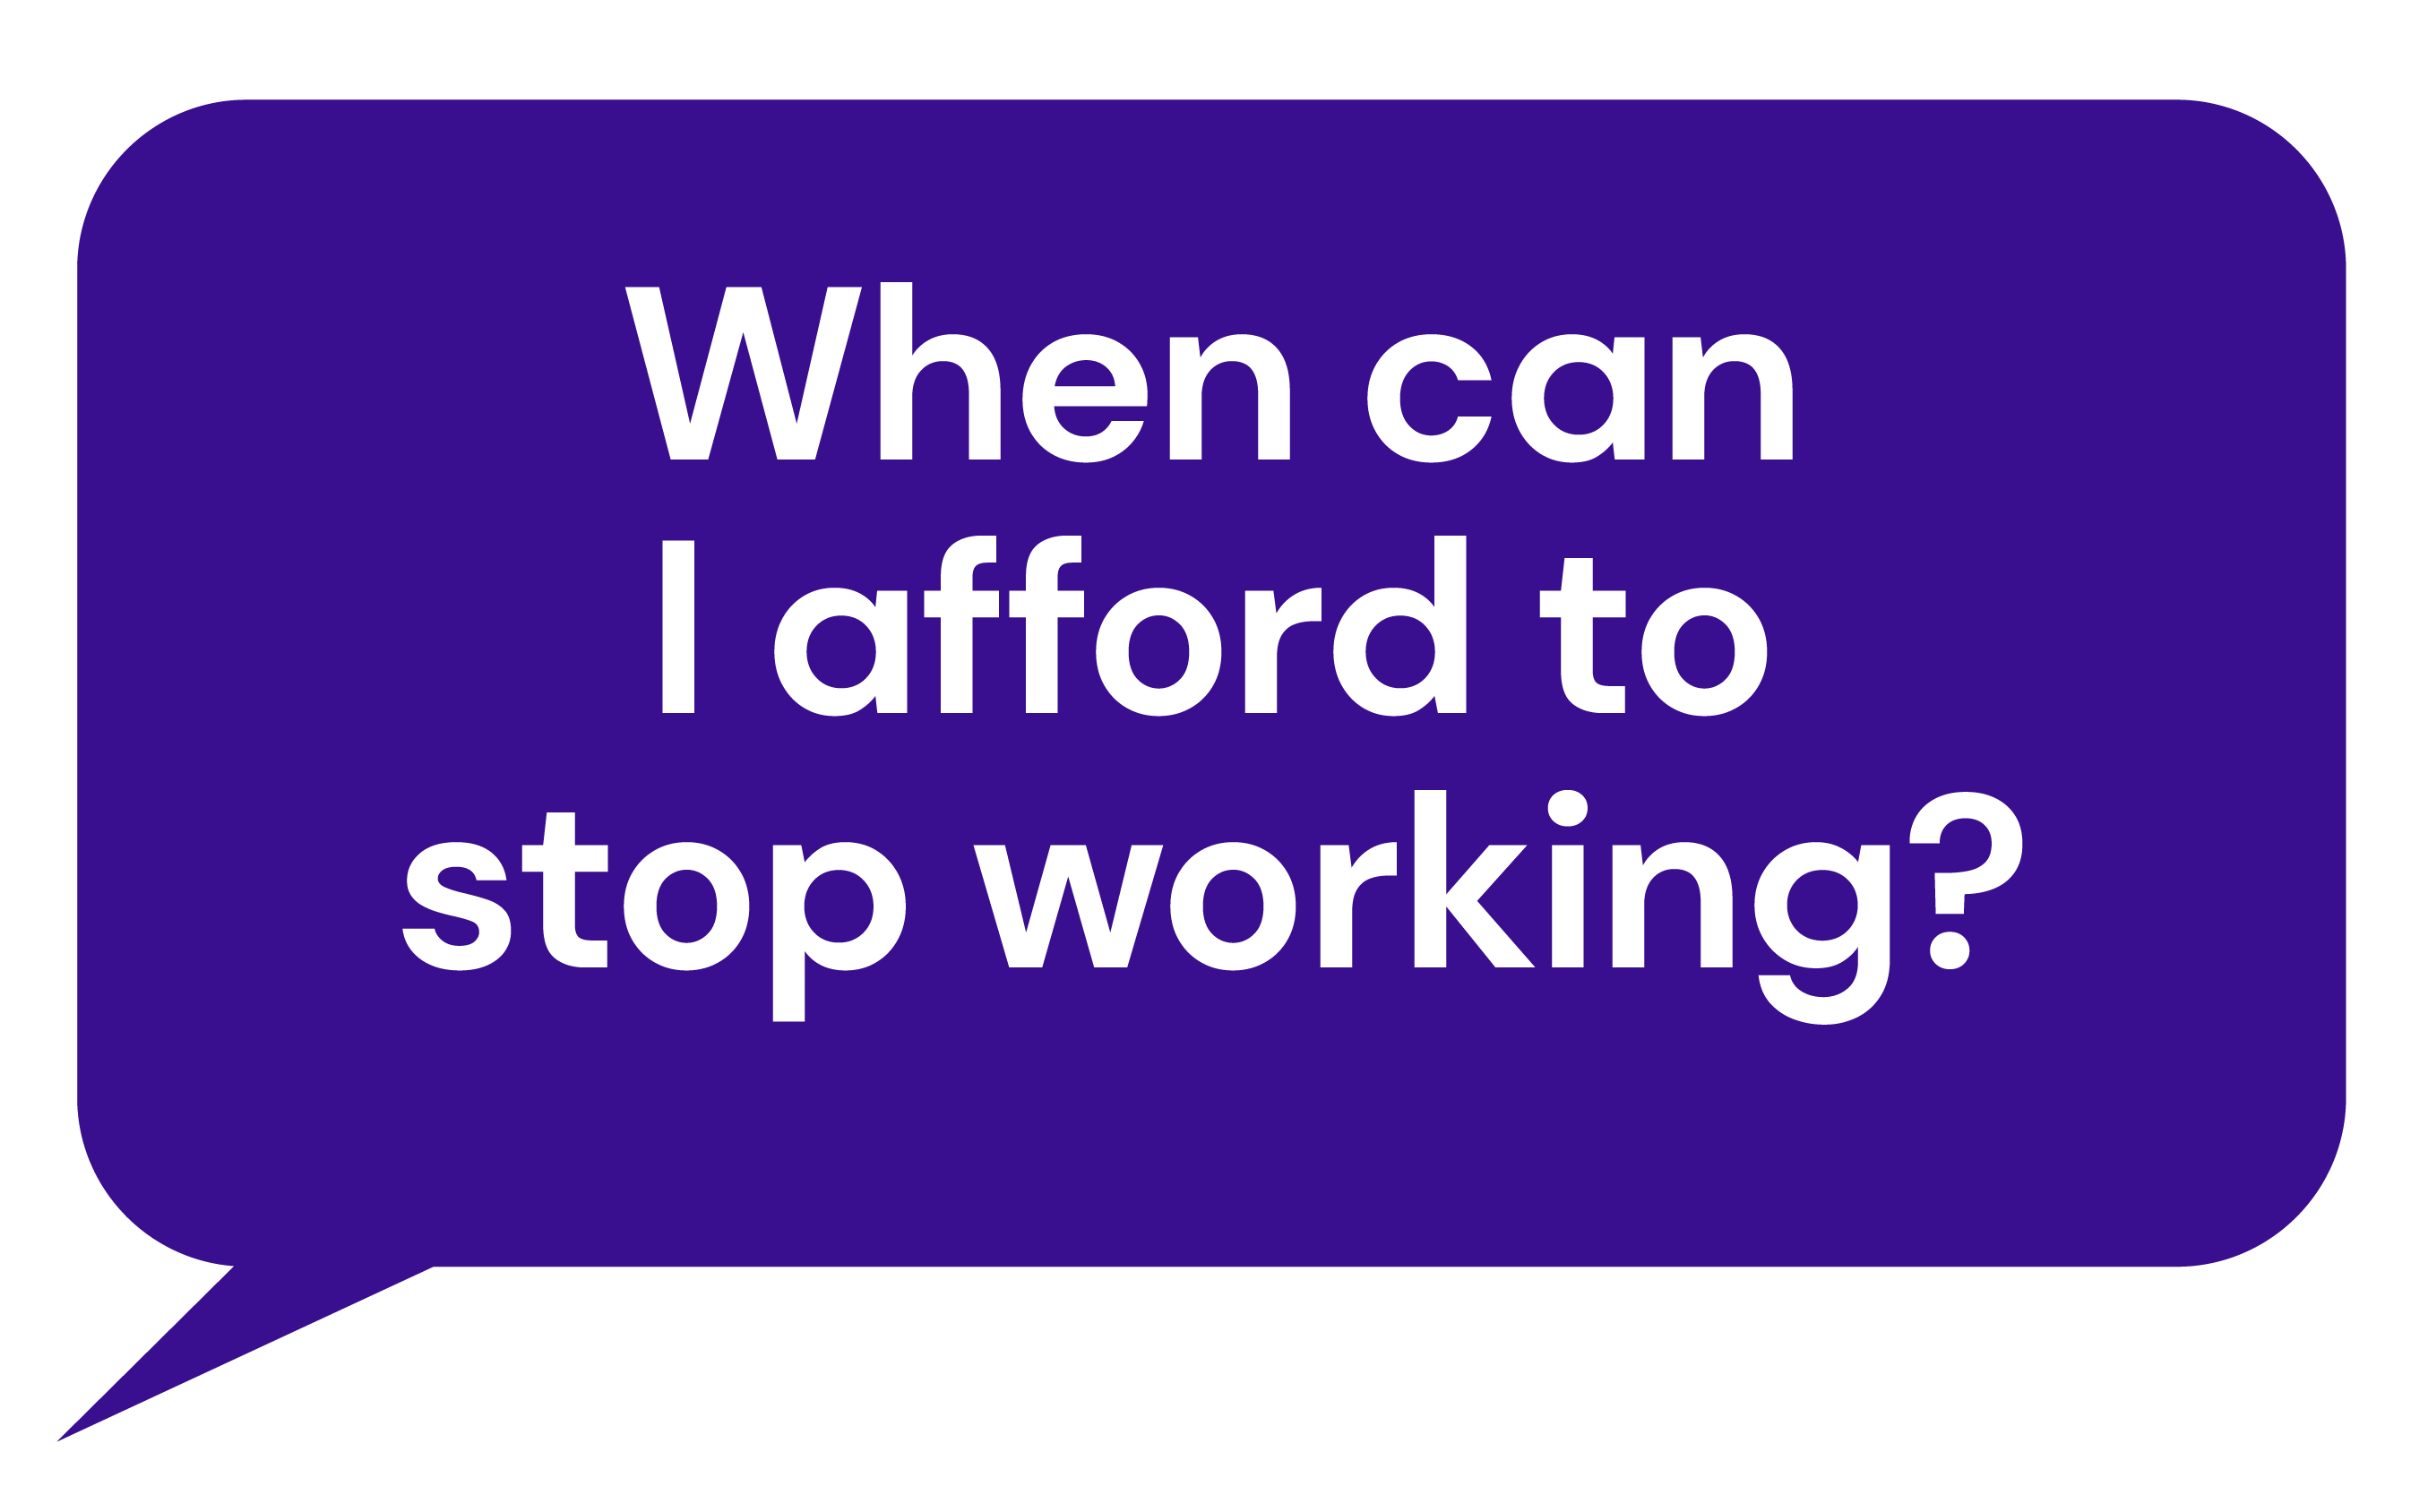 When can I afford to stop working?